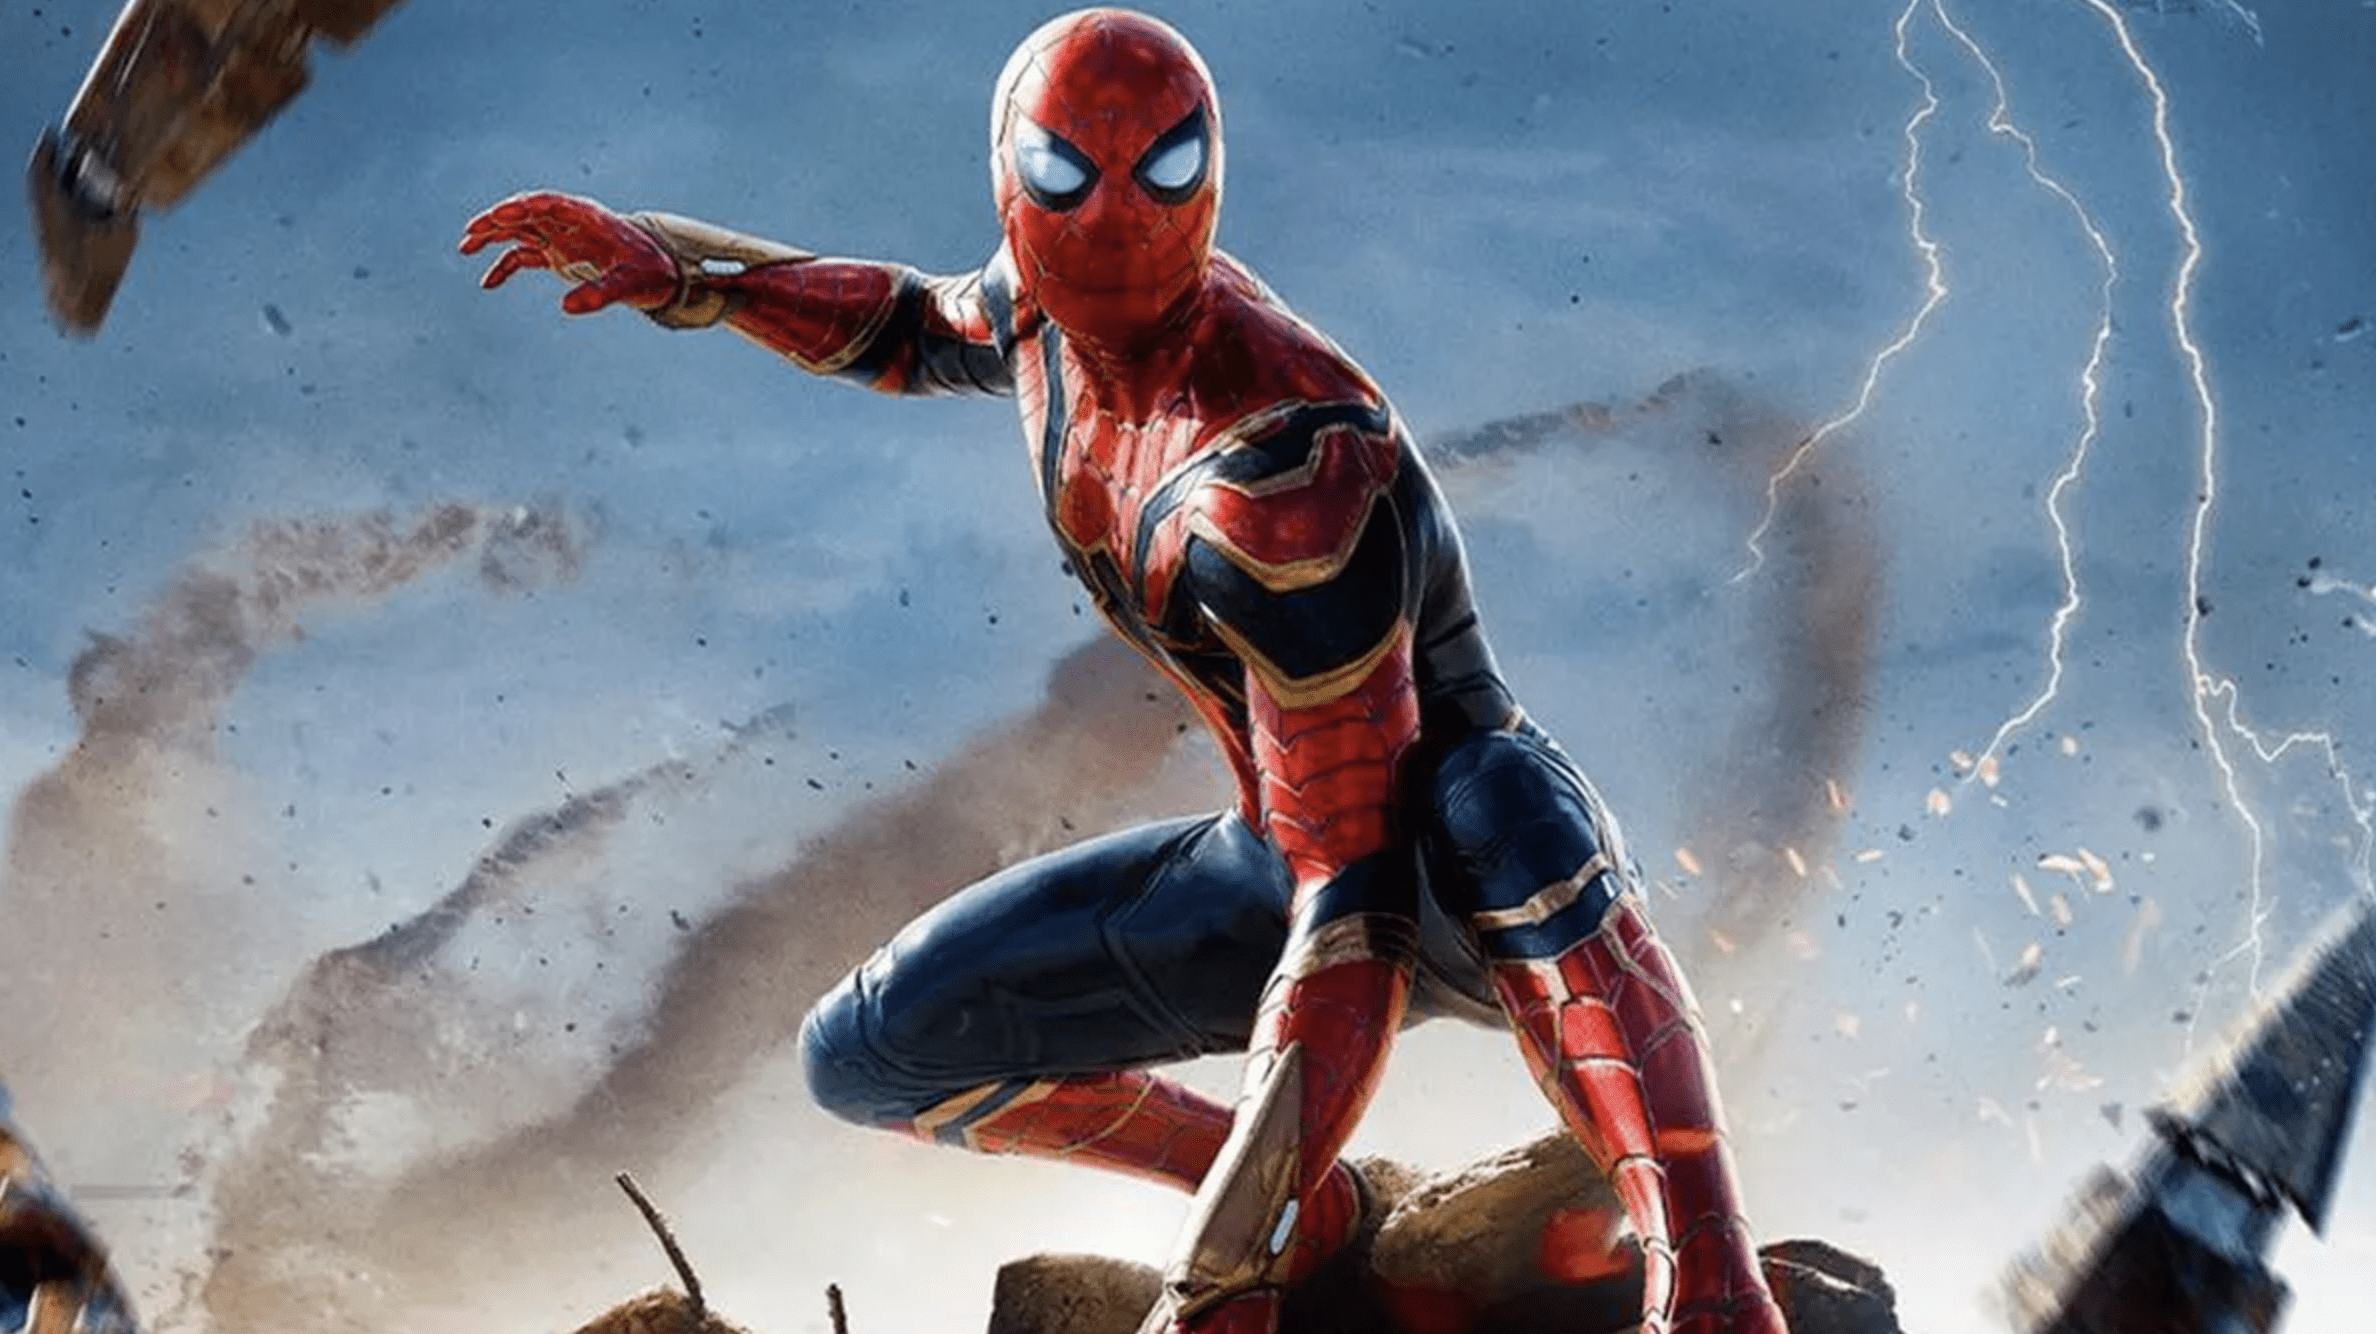 Spider-Man: No Way Home: Third Largest Domestic Opening of All Time